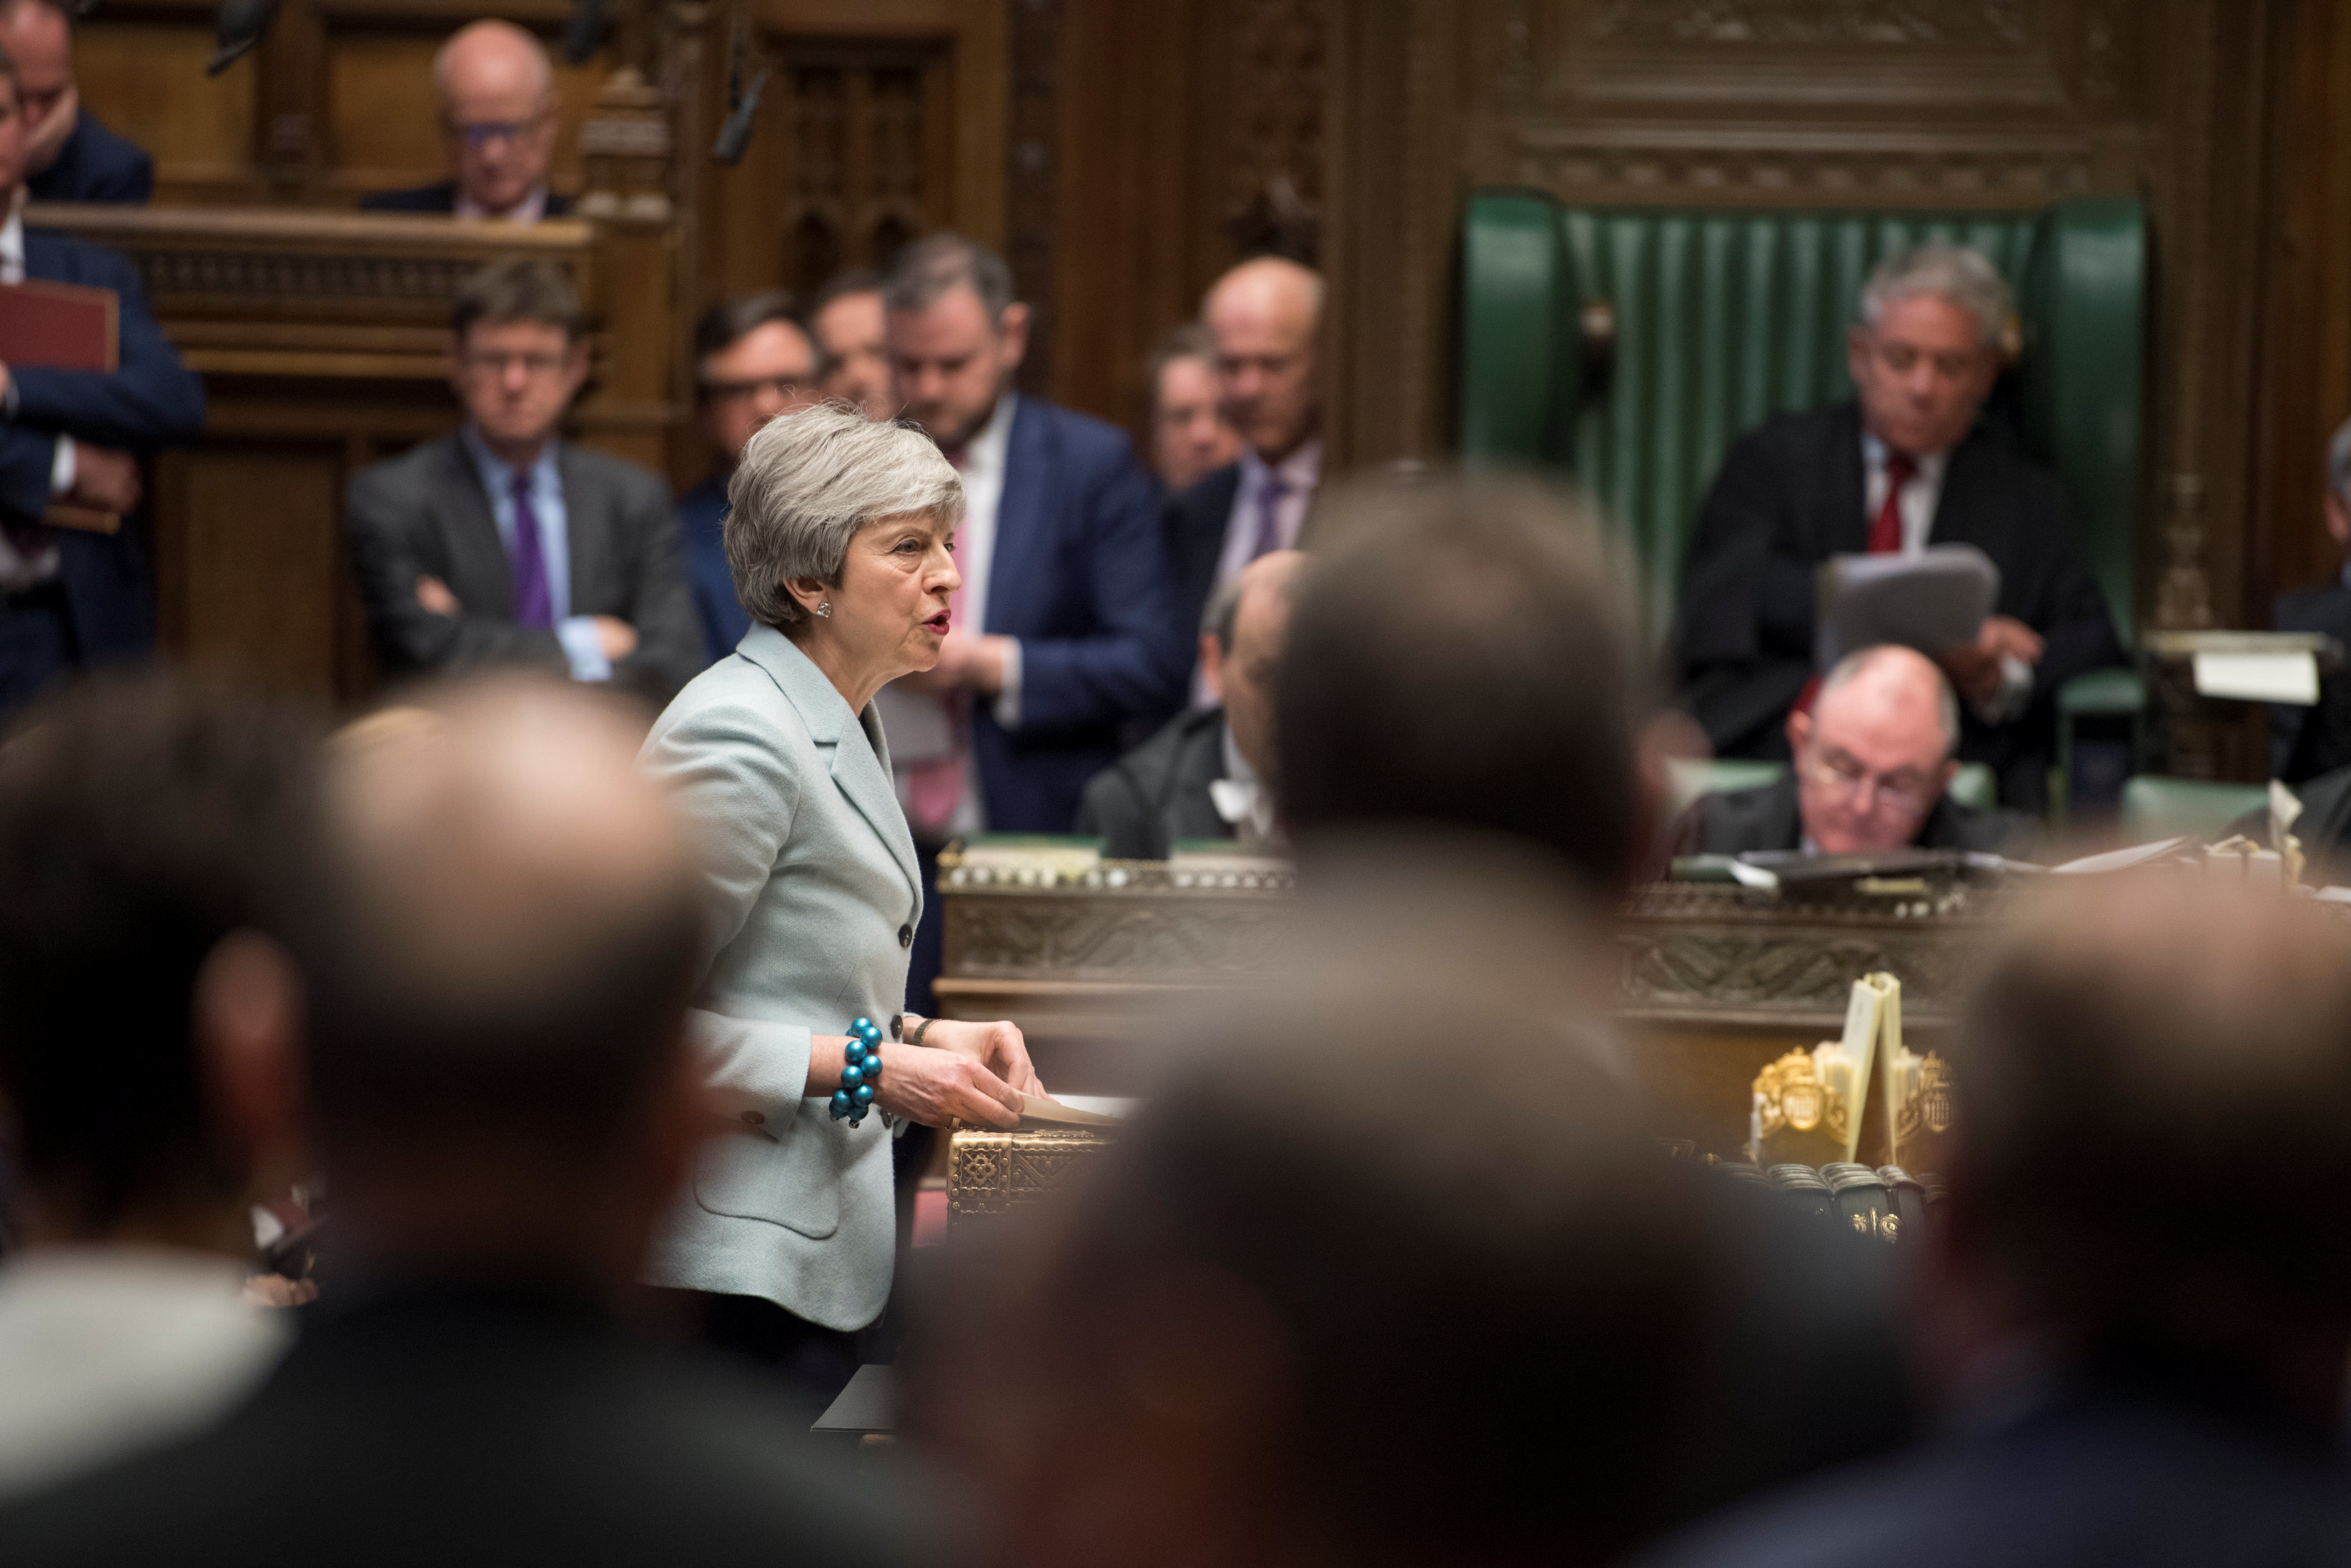 U.K. Prime Minister Theresa May in Parliament as House of Commons session presided by the speaker John Bercow, London, March 25, 2019.